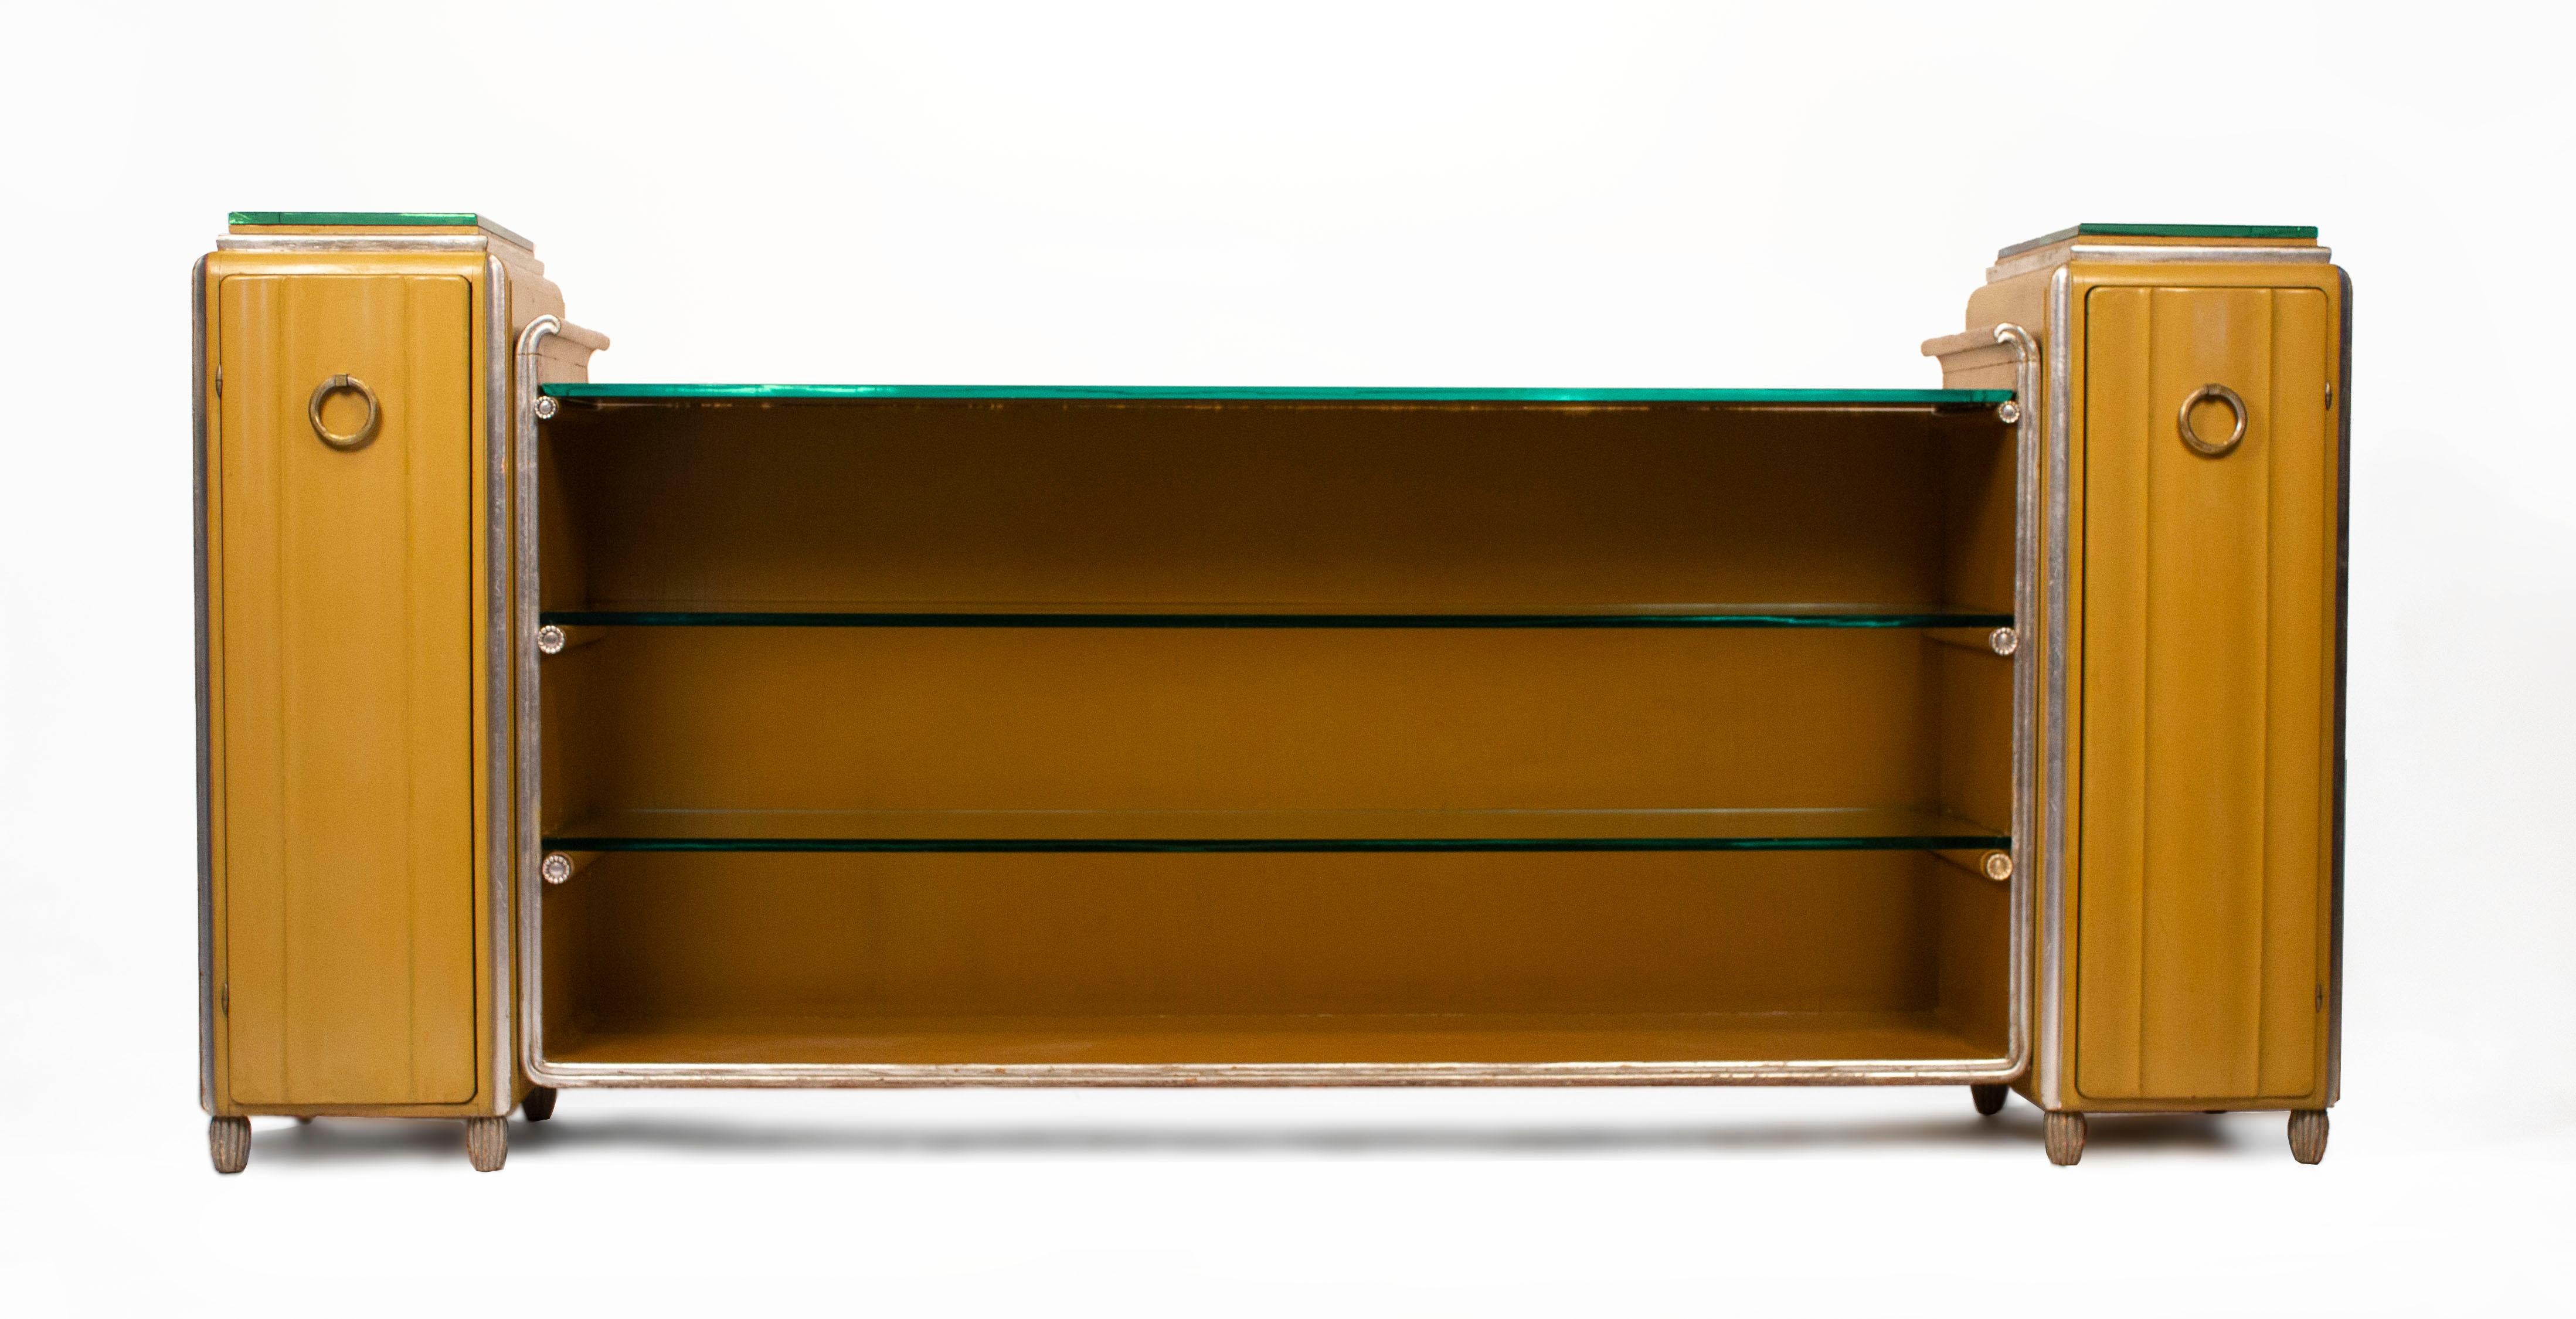 Rare and important lacquered sideboard in two tone yellow ochre finish with silver leaf ornamentation, original mirrored tops, glass shelves, bullet hinges, faceted solid brass silver leafed hardware and silver plated shelf ornamentation. This